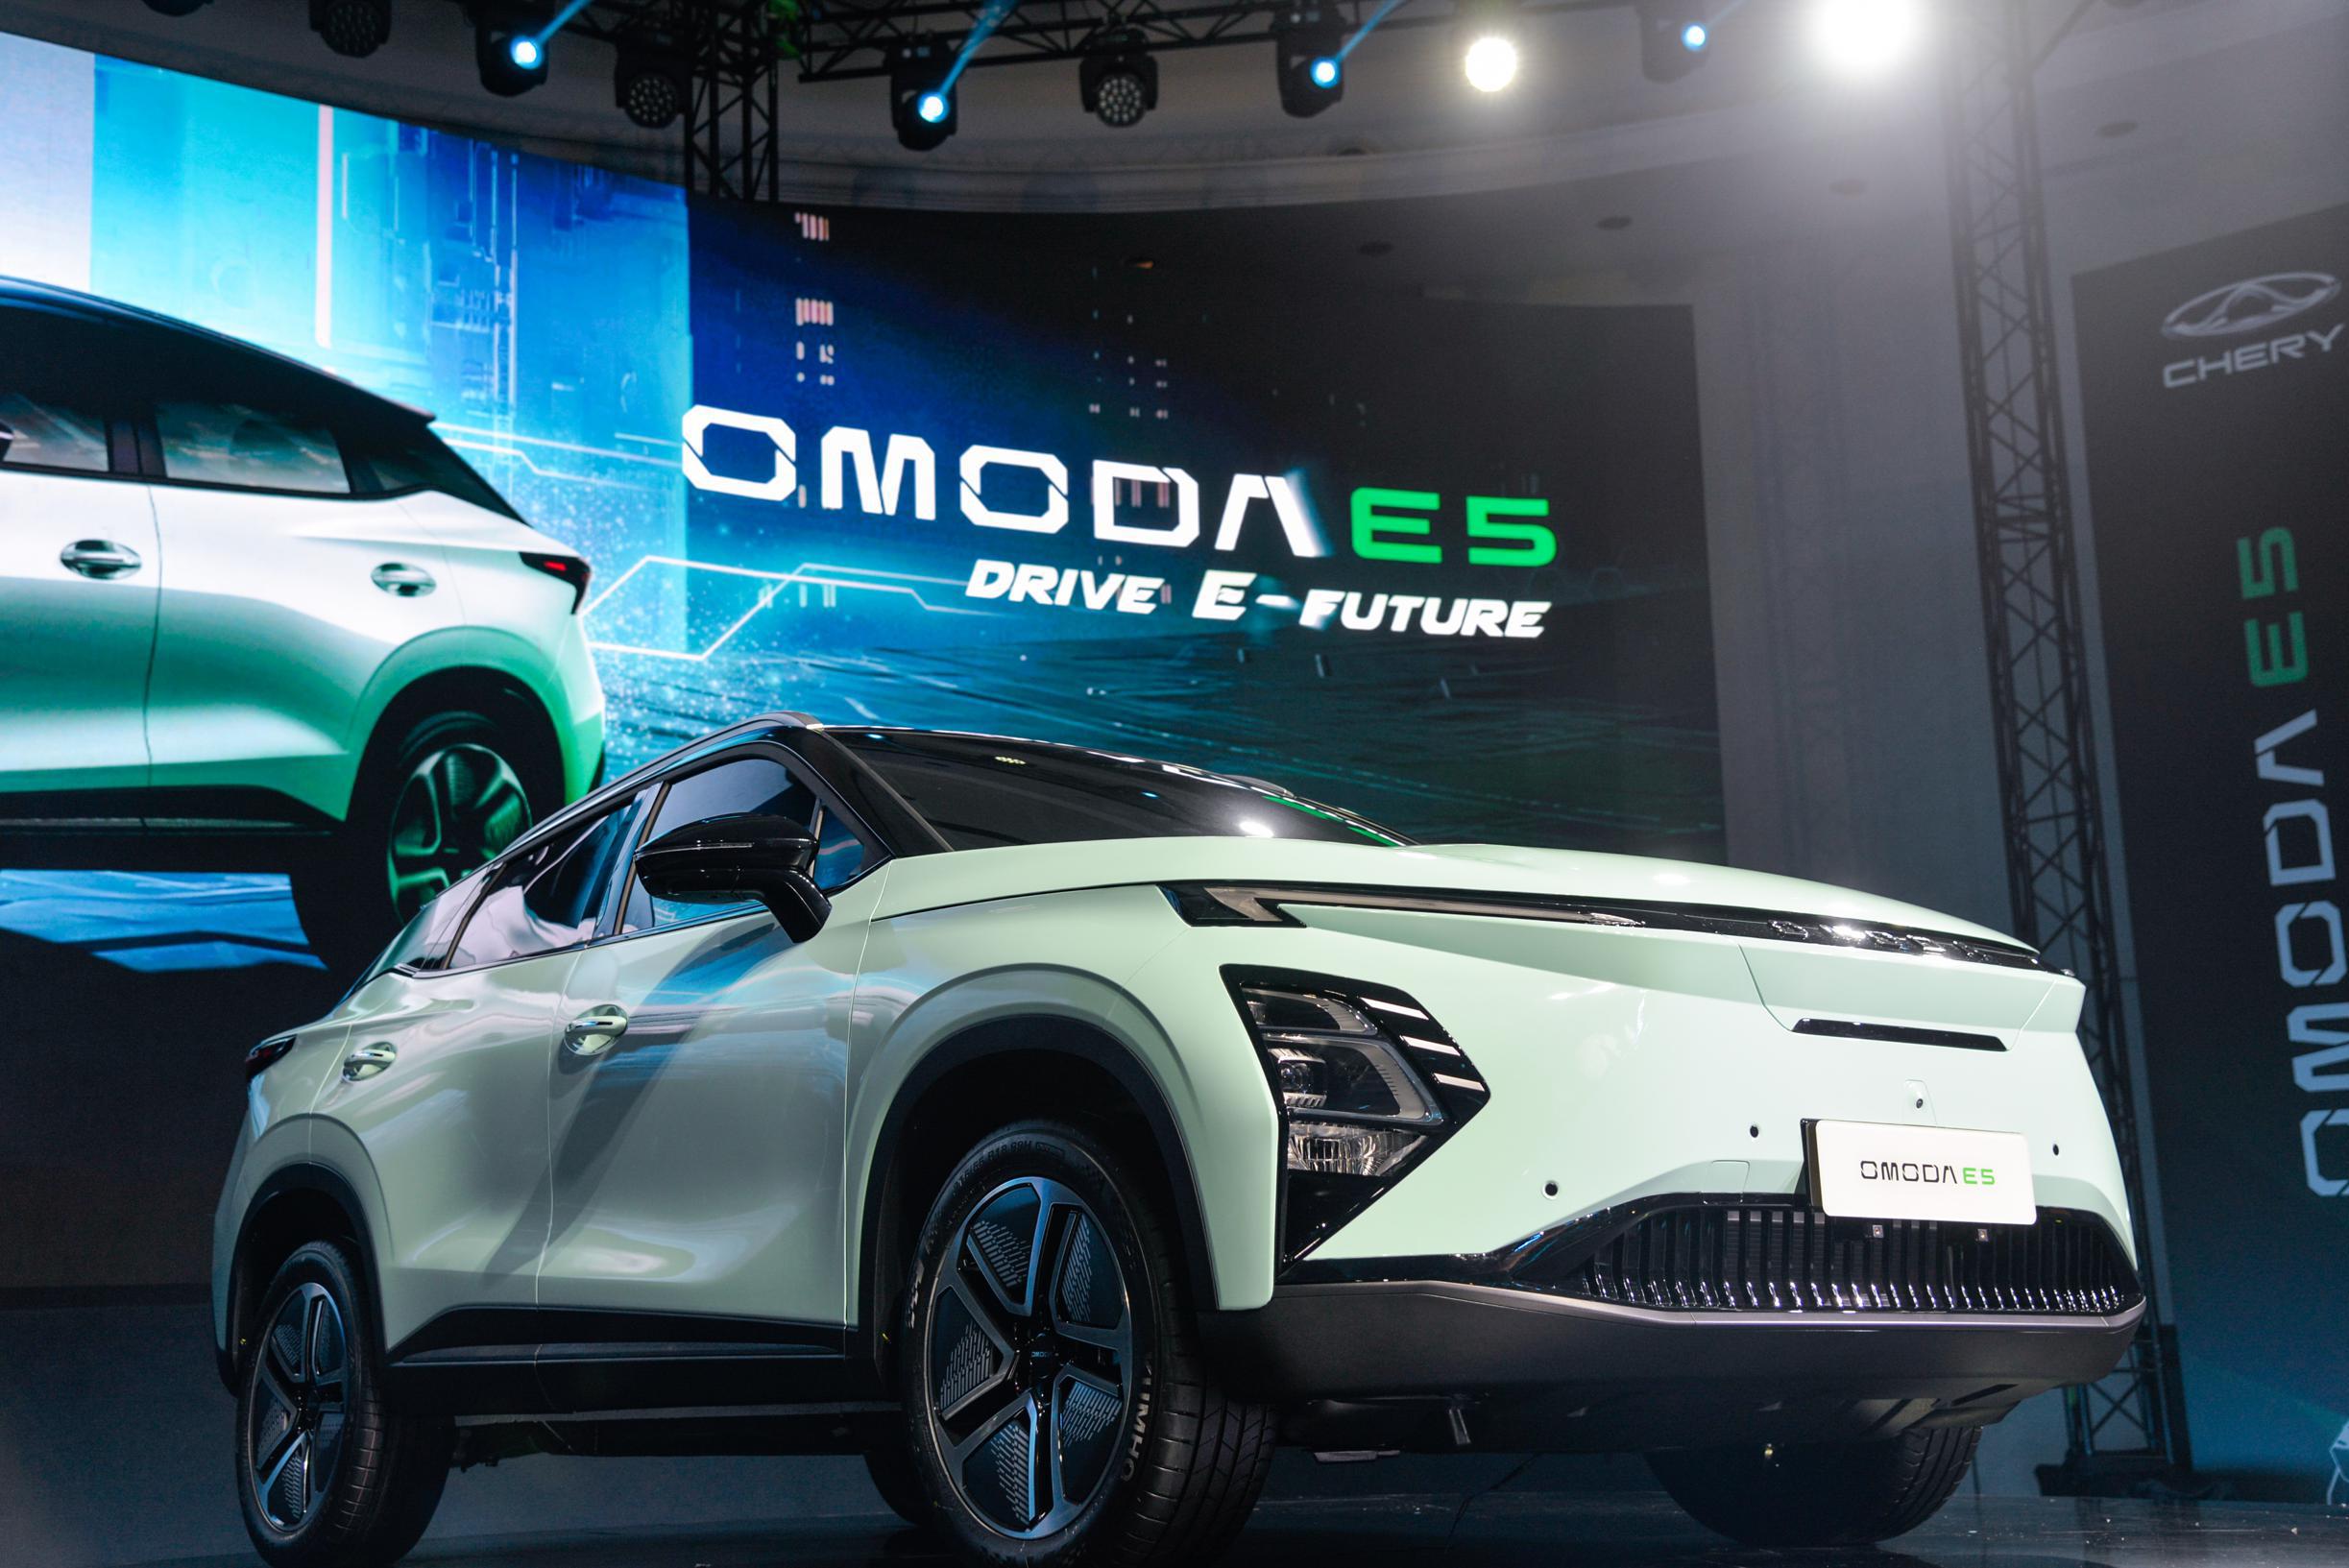 Two new Chinese car brands, Omoda and Jaecoo, are set to arrive in our country this summer.